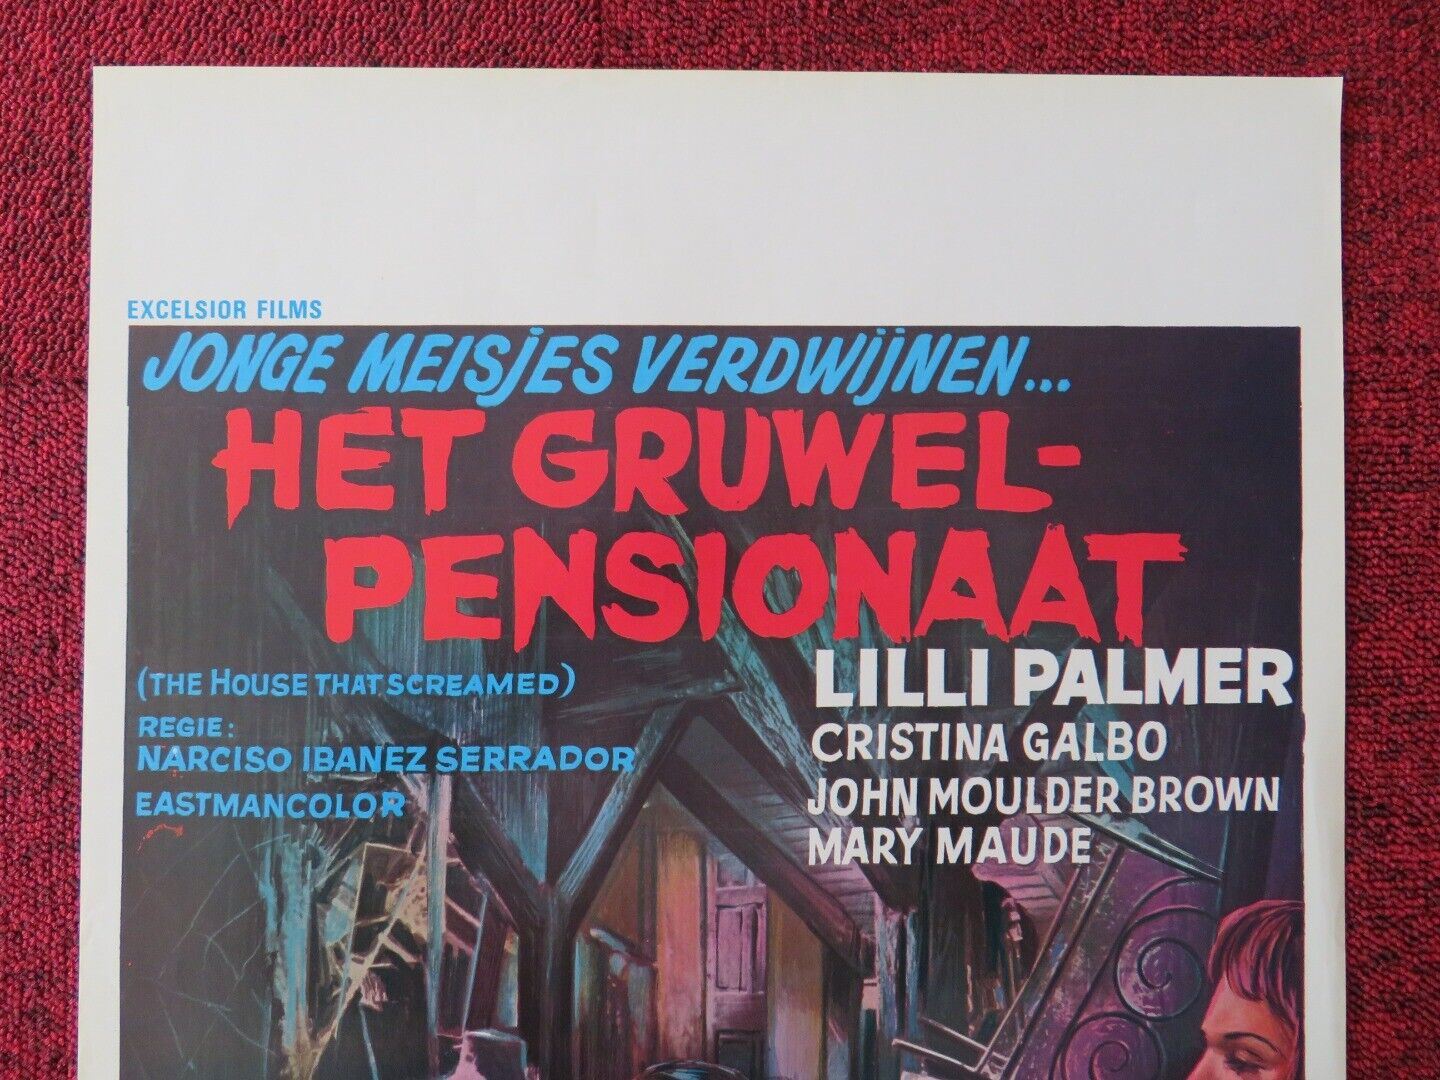 THE HOUSE THAT SCREAMED BELGIUM (21"x14") POSTER LILLI PALMER 1969